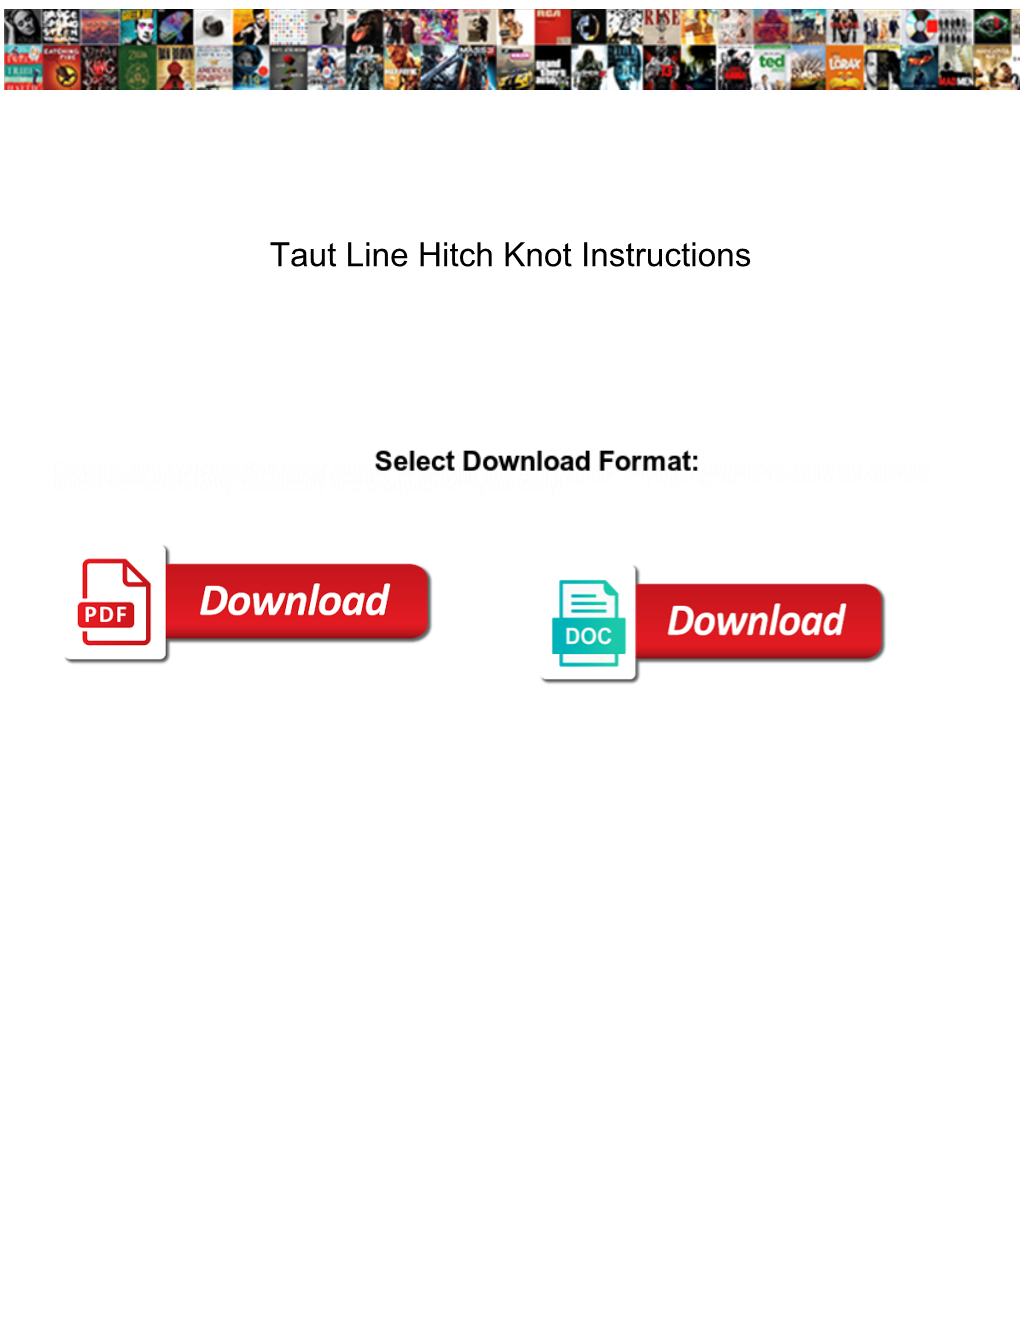 Taut Line Hitch Knot Instructions